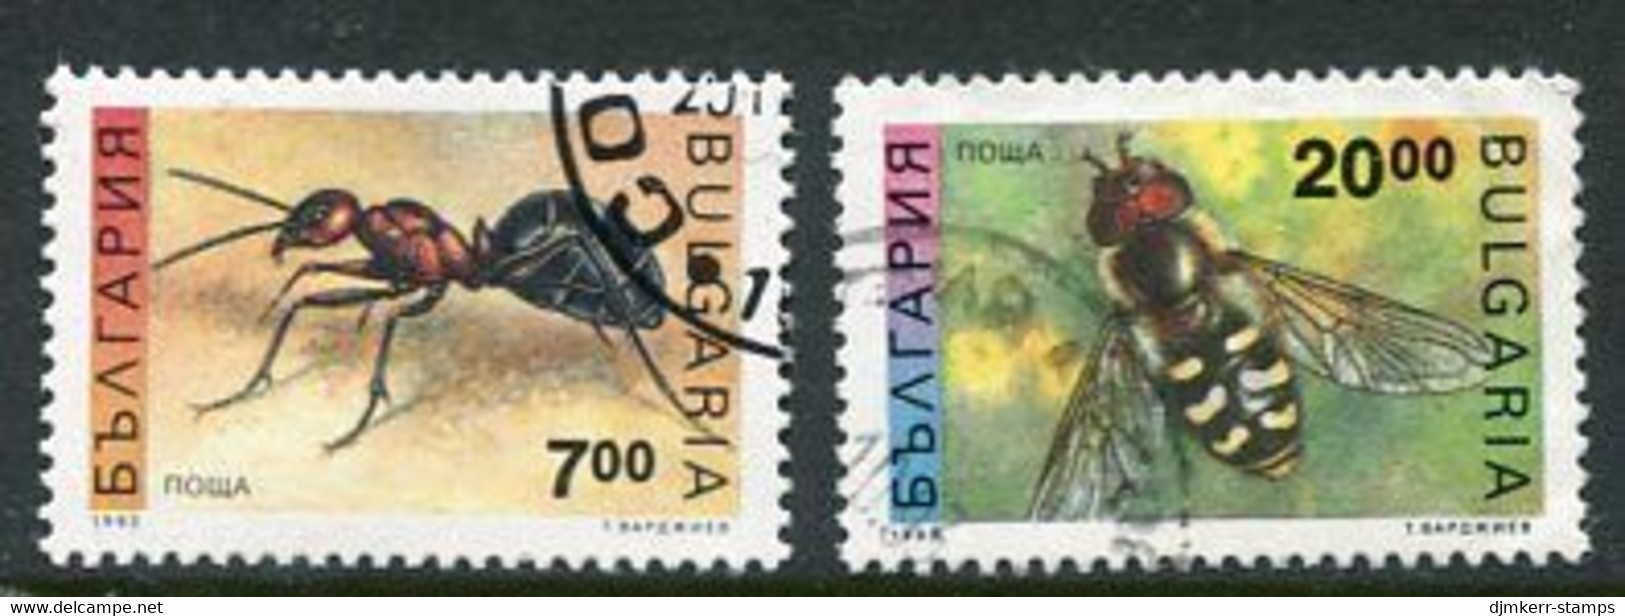 BULGARIA 1992 Insect Definitive 7, 20 L. Used.  Michel 3998-99 - Gebraucht